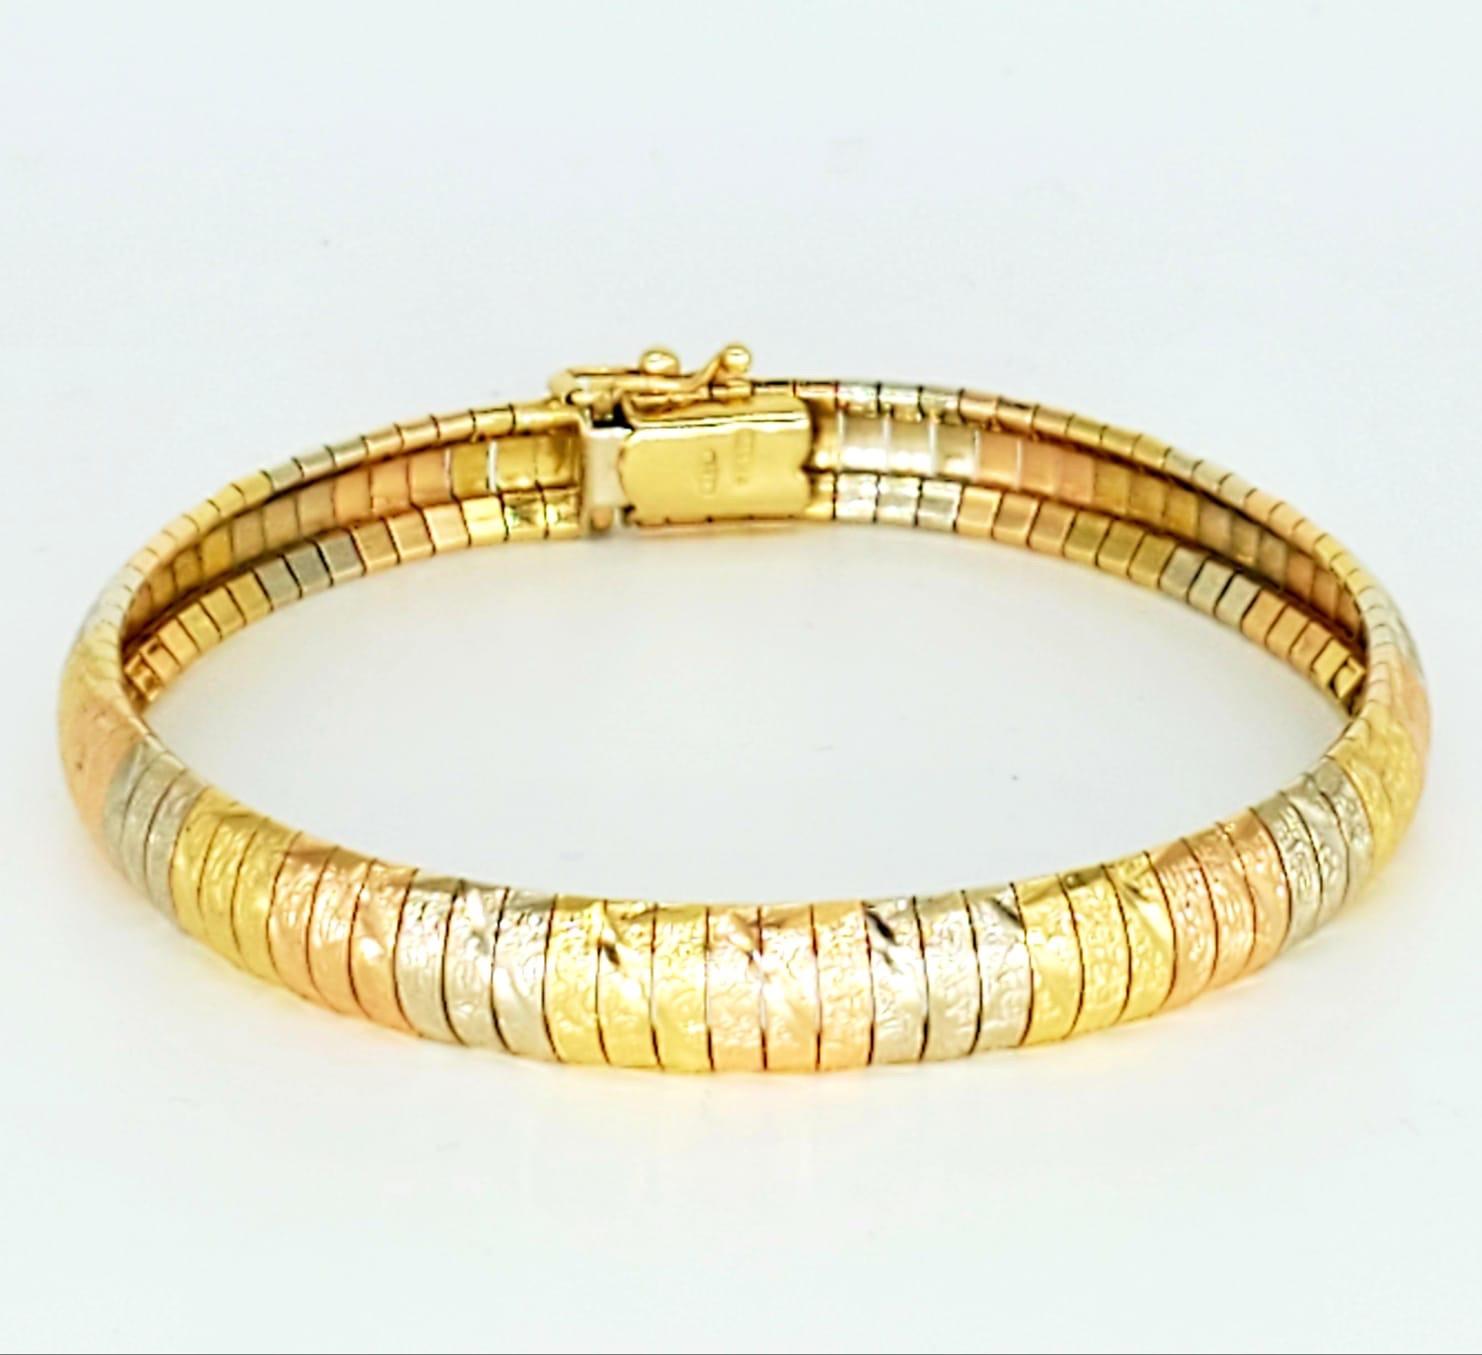 Vintage 3-Tone Woven Snake Design 18k Bracelet. The bracelet is 7.6mm wide and 7.5 inches long. The bracelet features a beautiful design with Diamond dust frost making it look glittery sparkly while it’s just the enhancements of the design. The